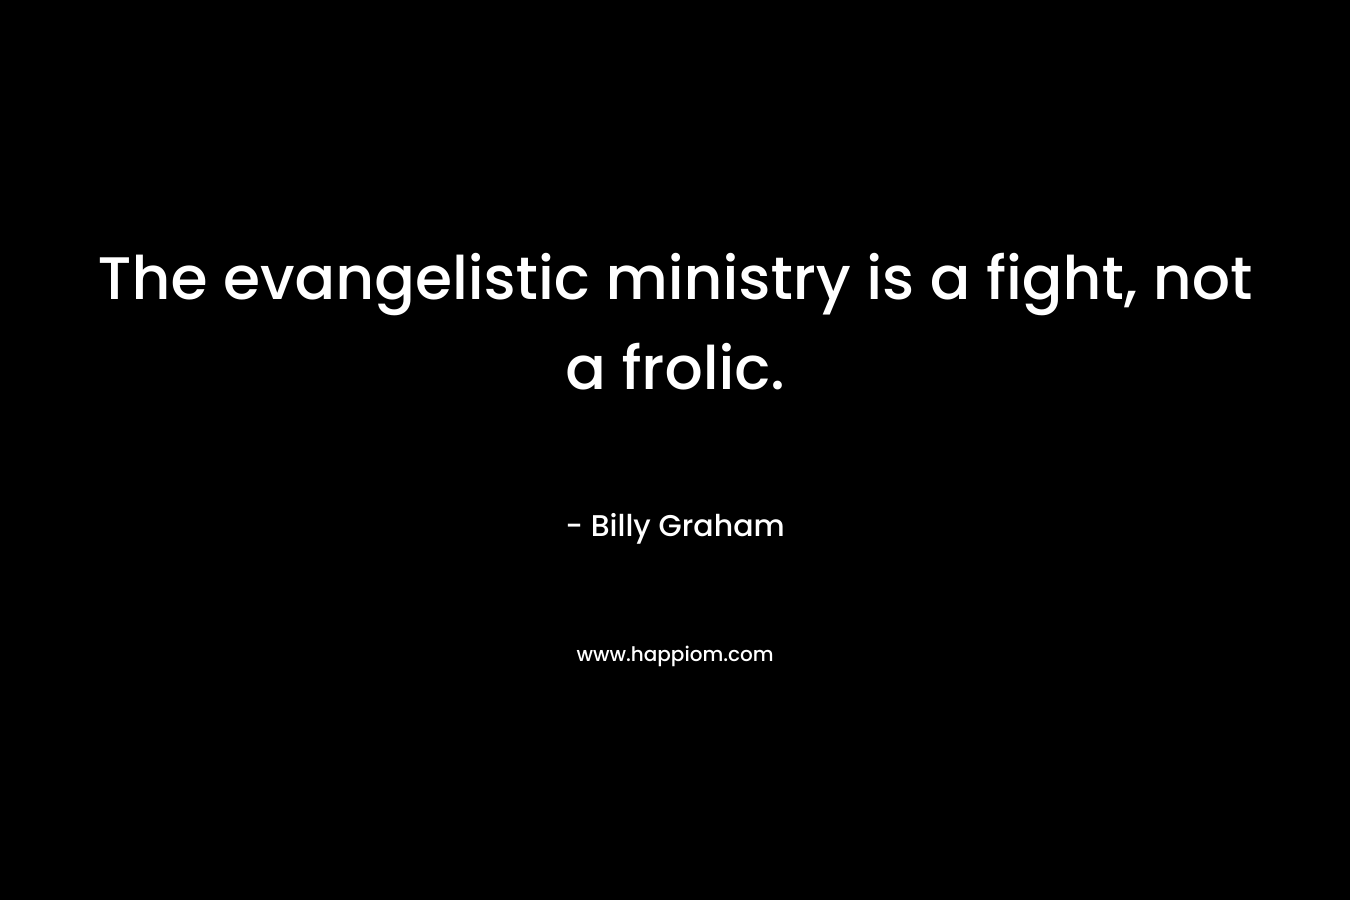 The evangelistic ministry is a fight, not a frolic.